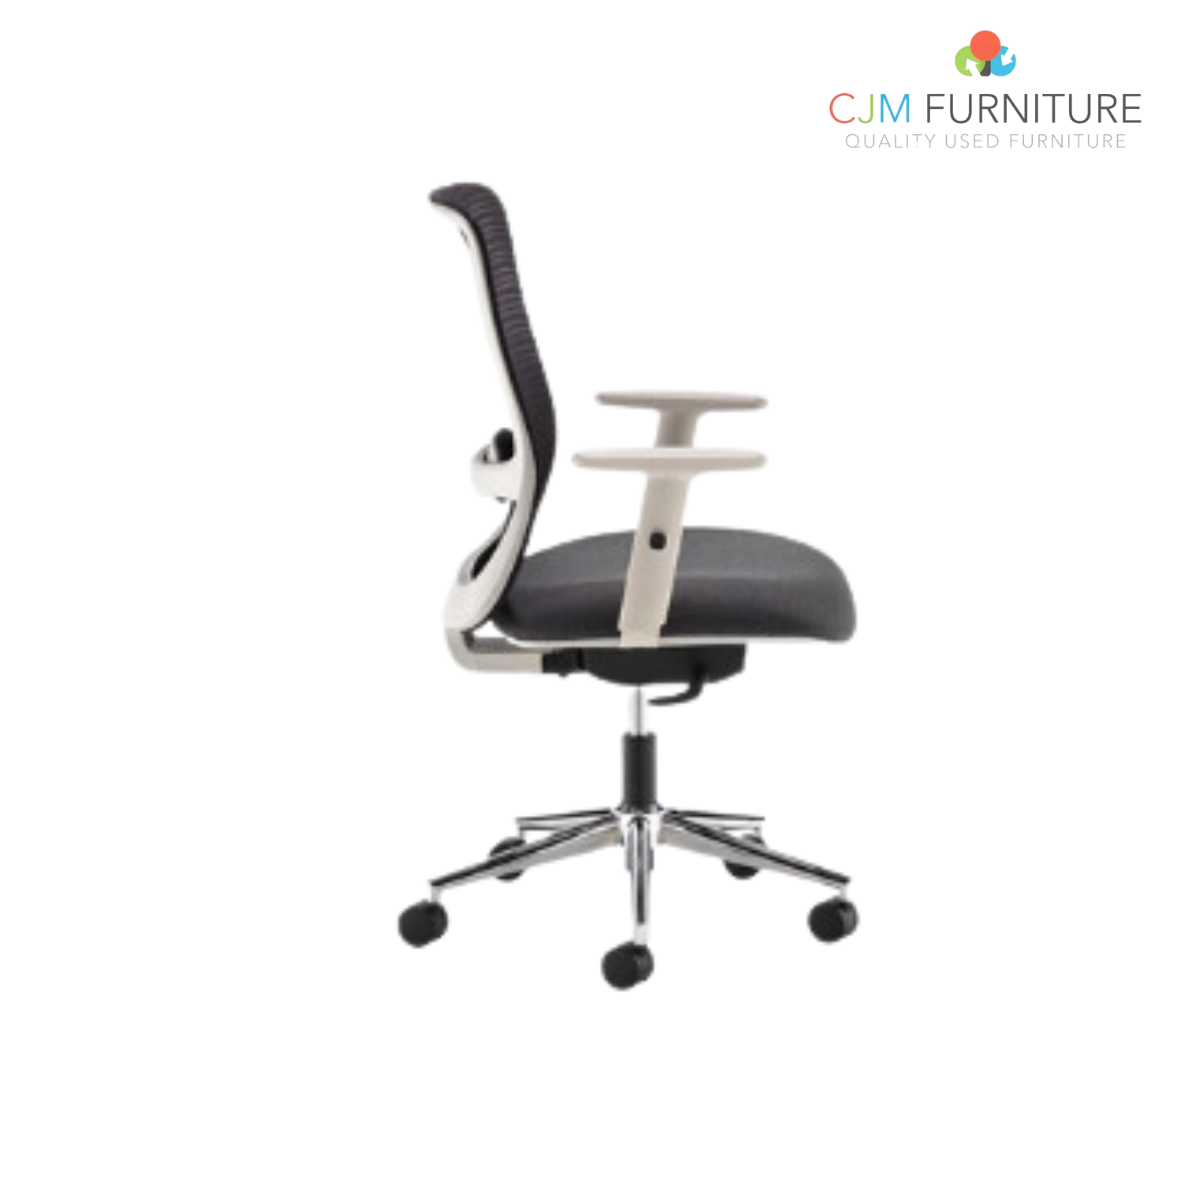 Arcade black mesh back operator chair with grey fabric seat, light grey frame and chrome base   12/04/21